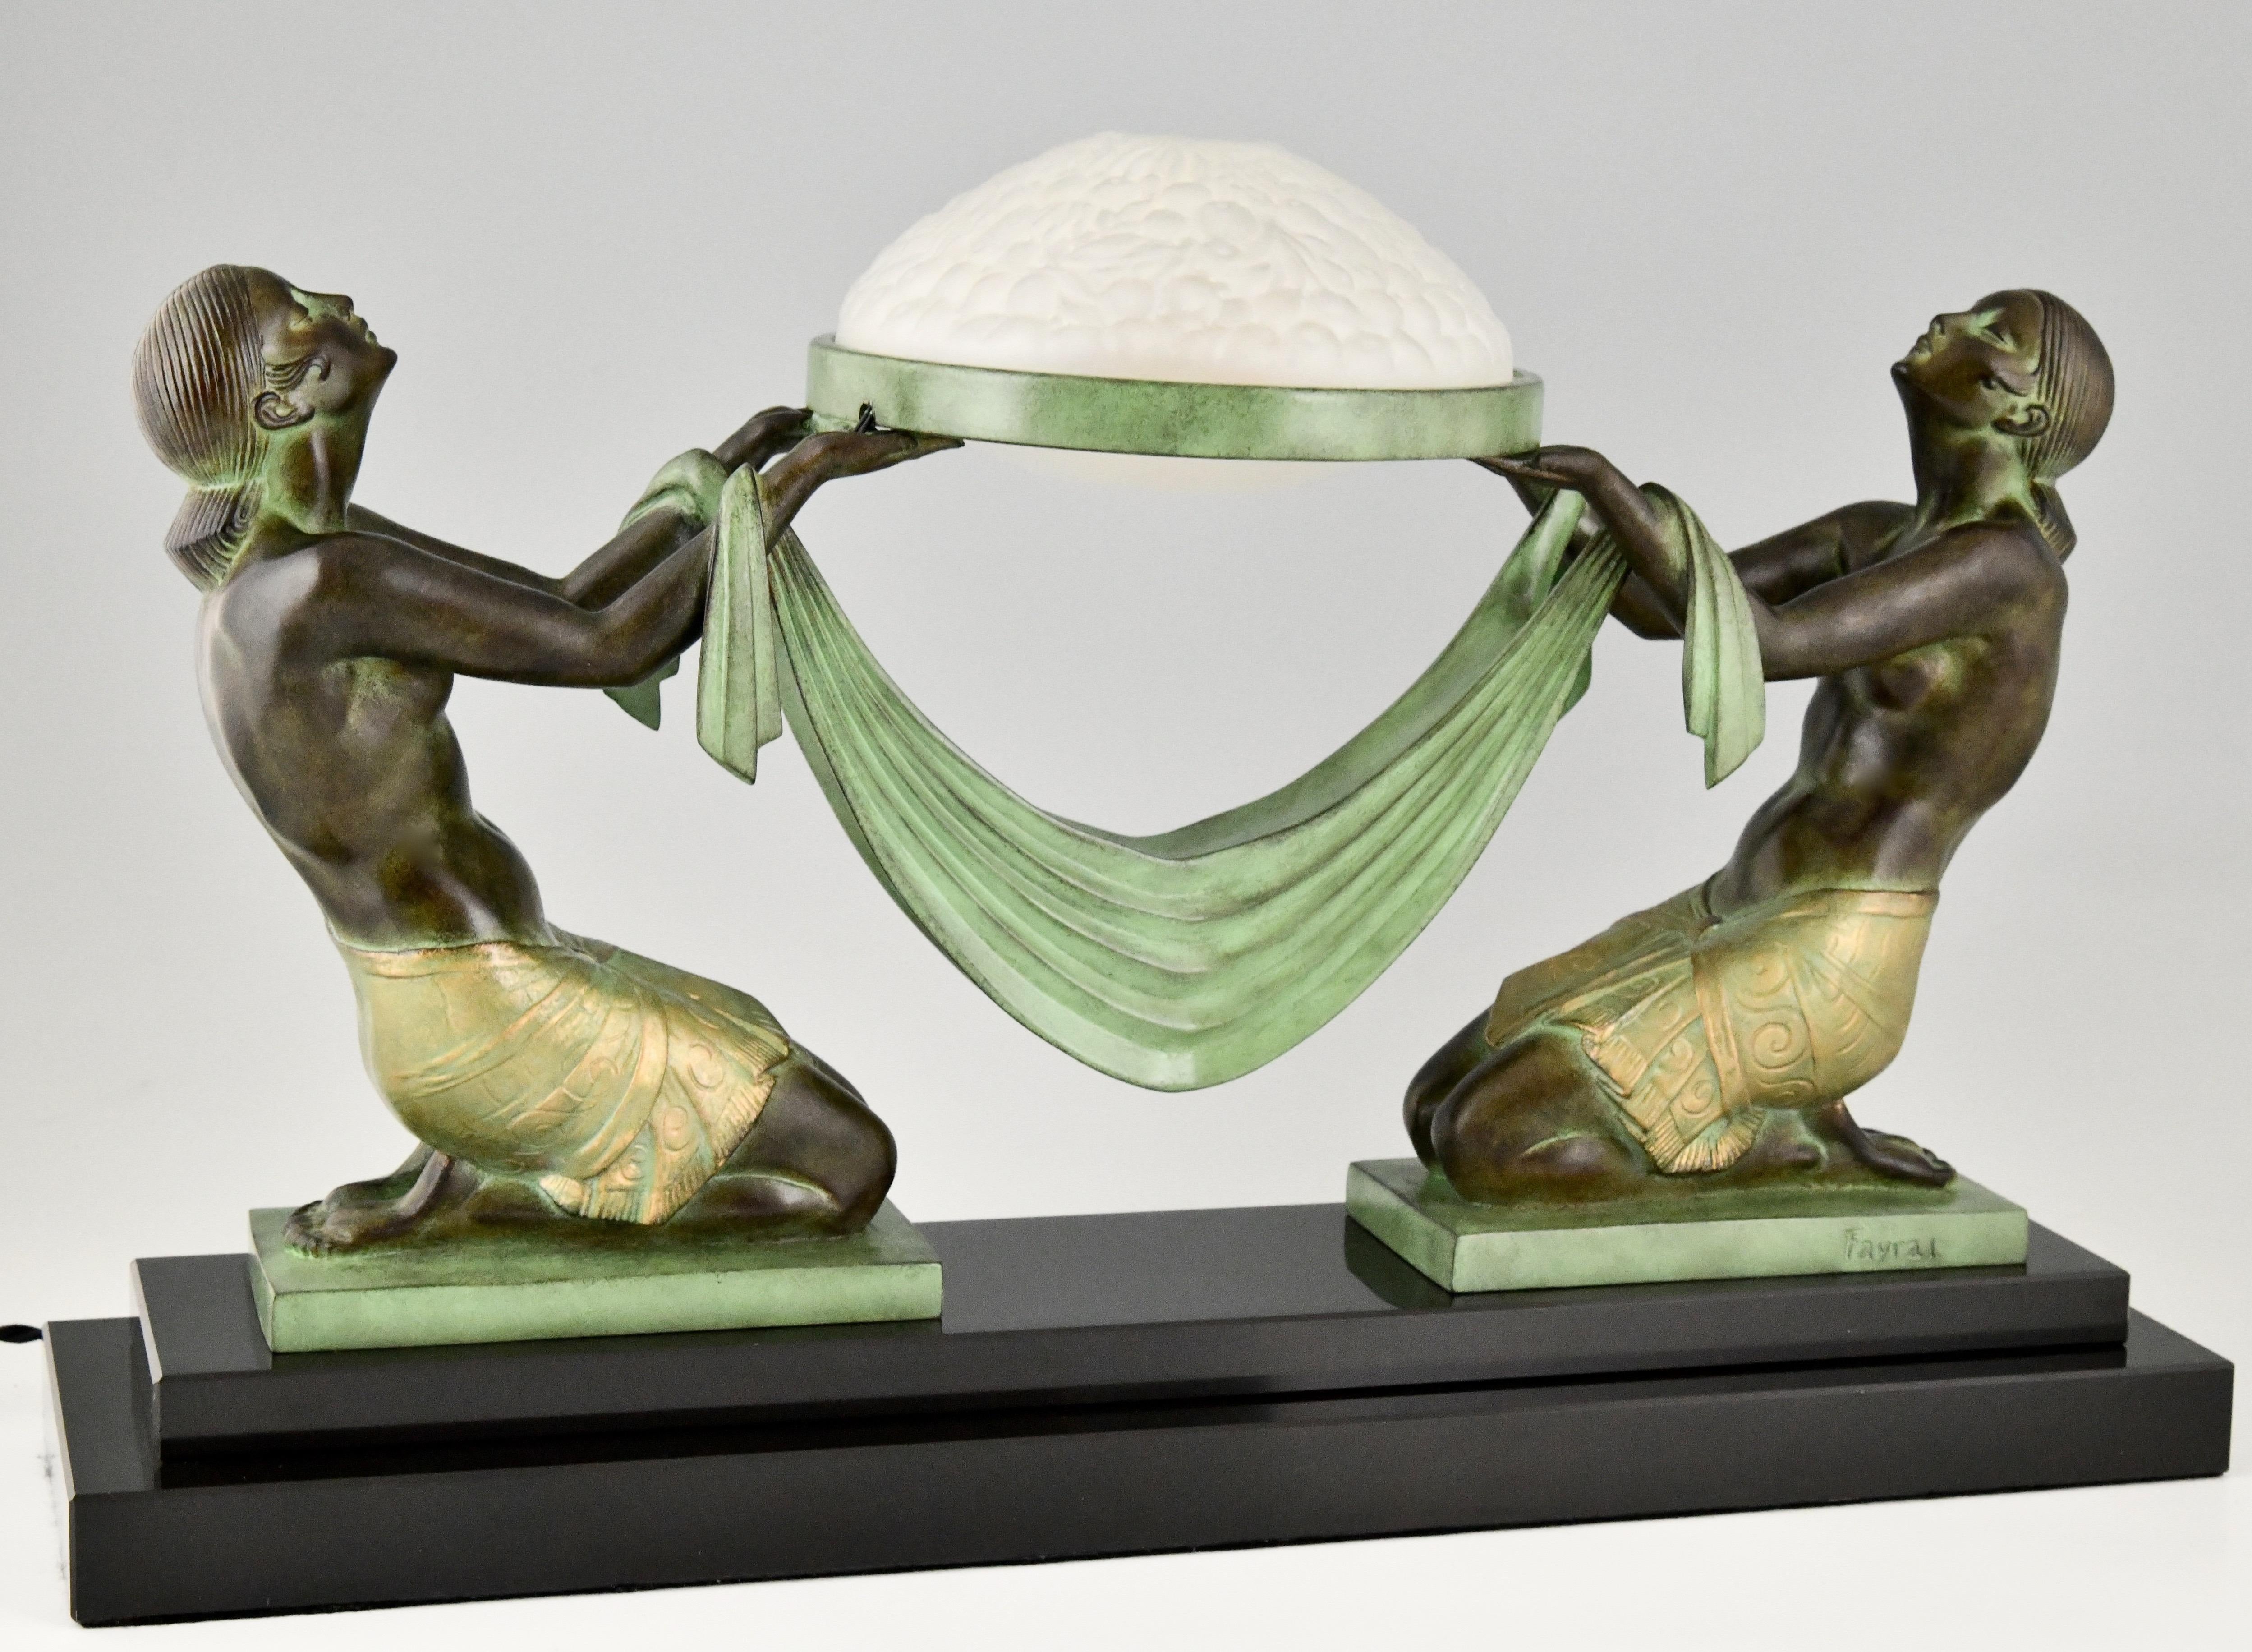 Art Deco Style Table Lamp with Two Kneeling Nudes by Fayral for Max Le Verrier 1